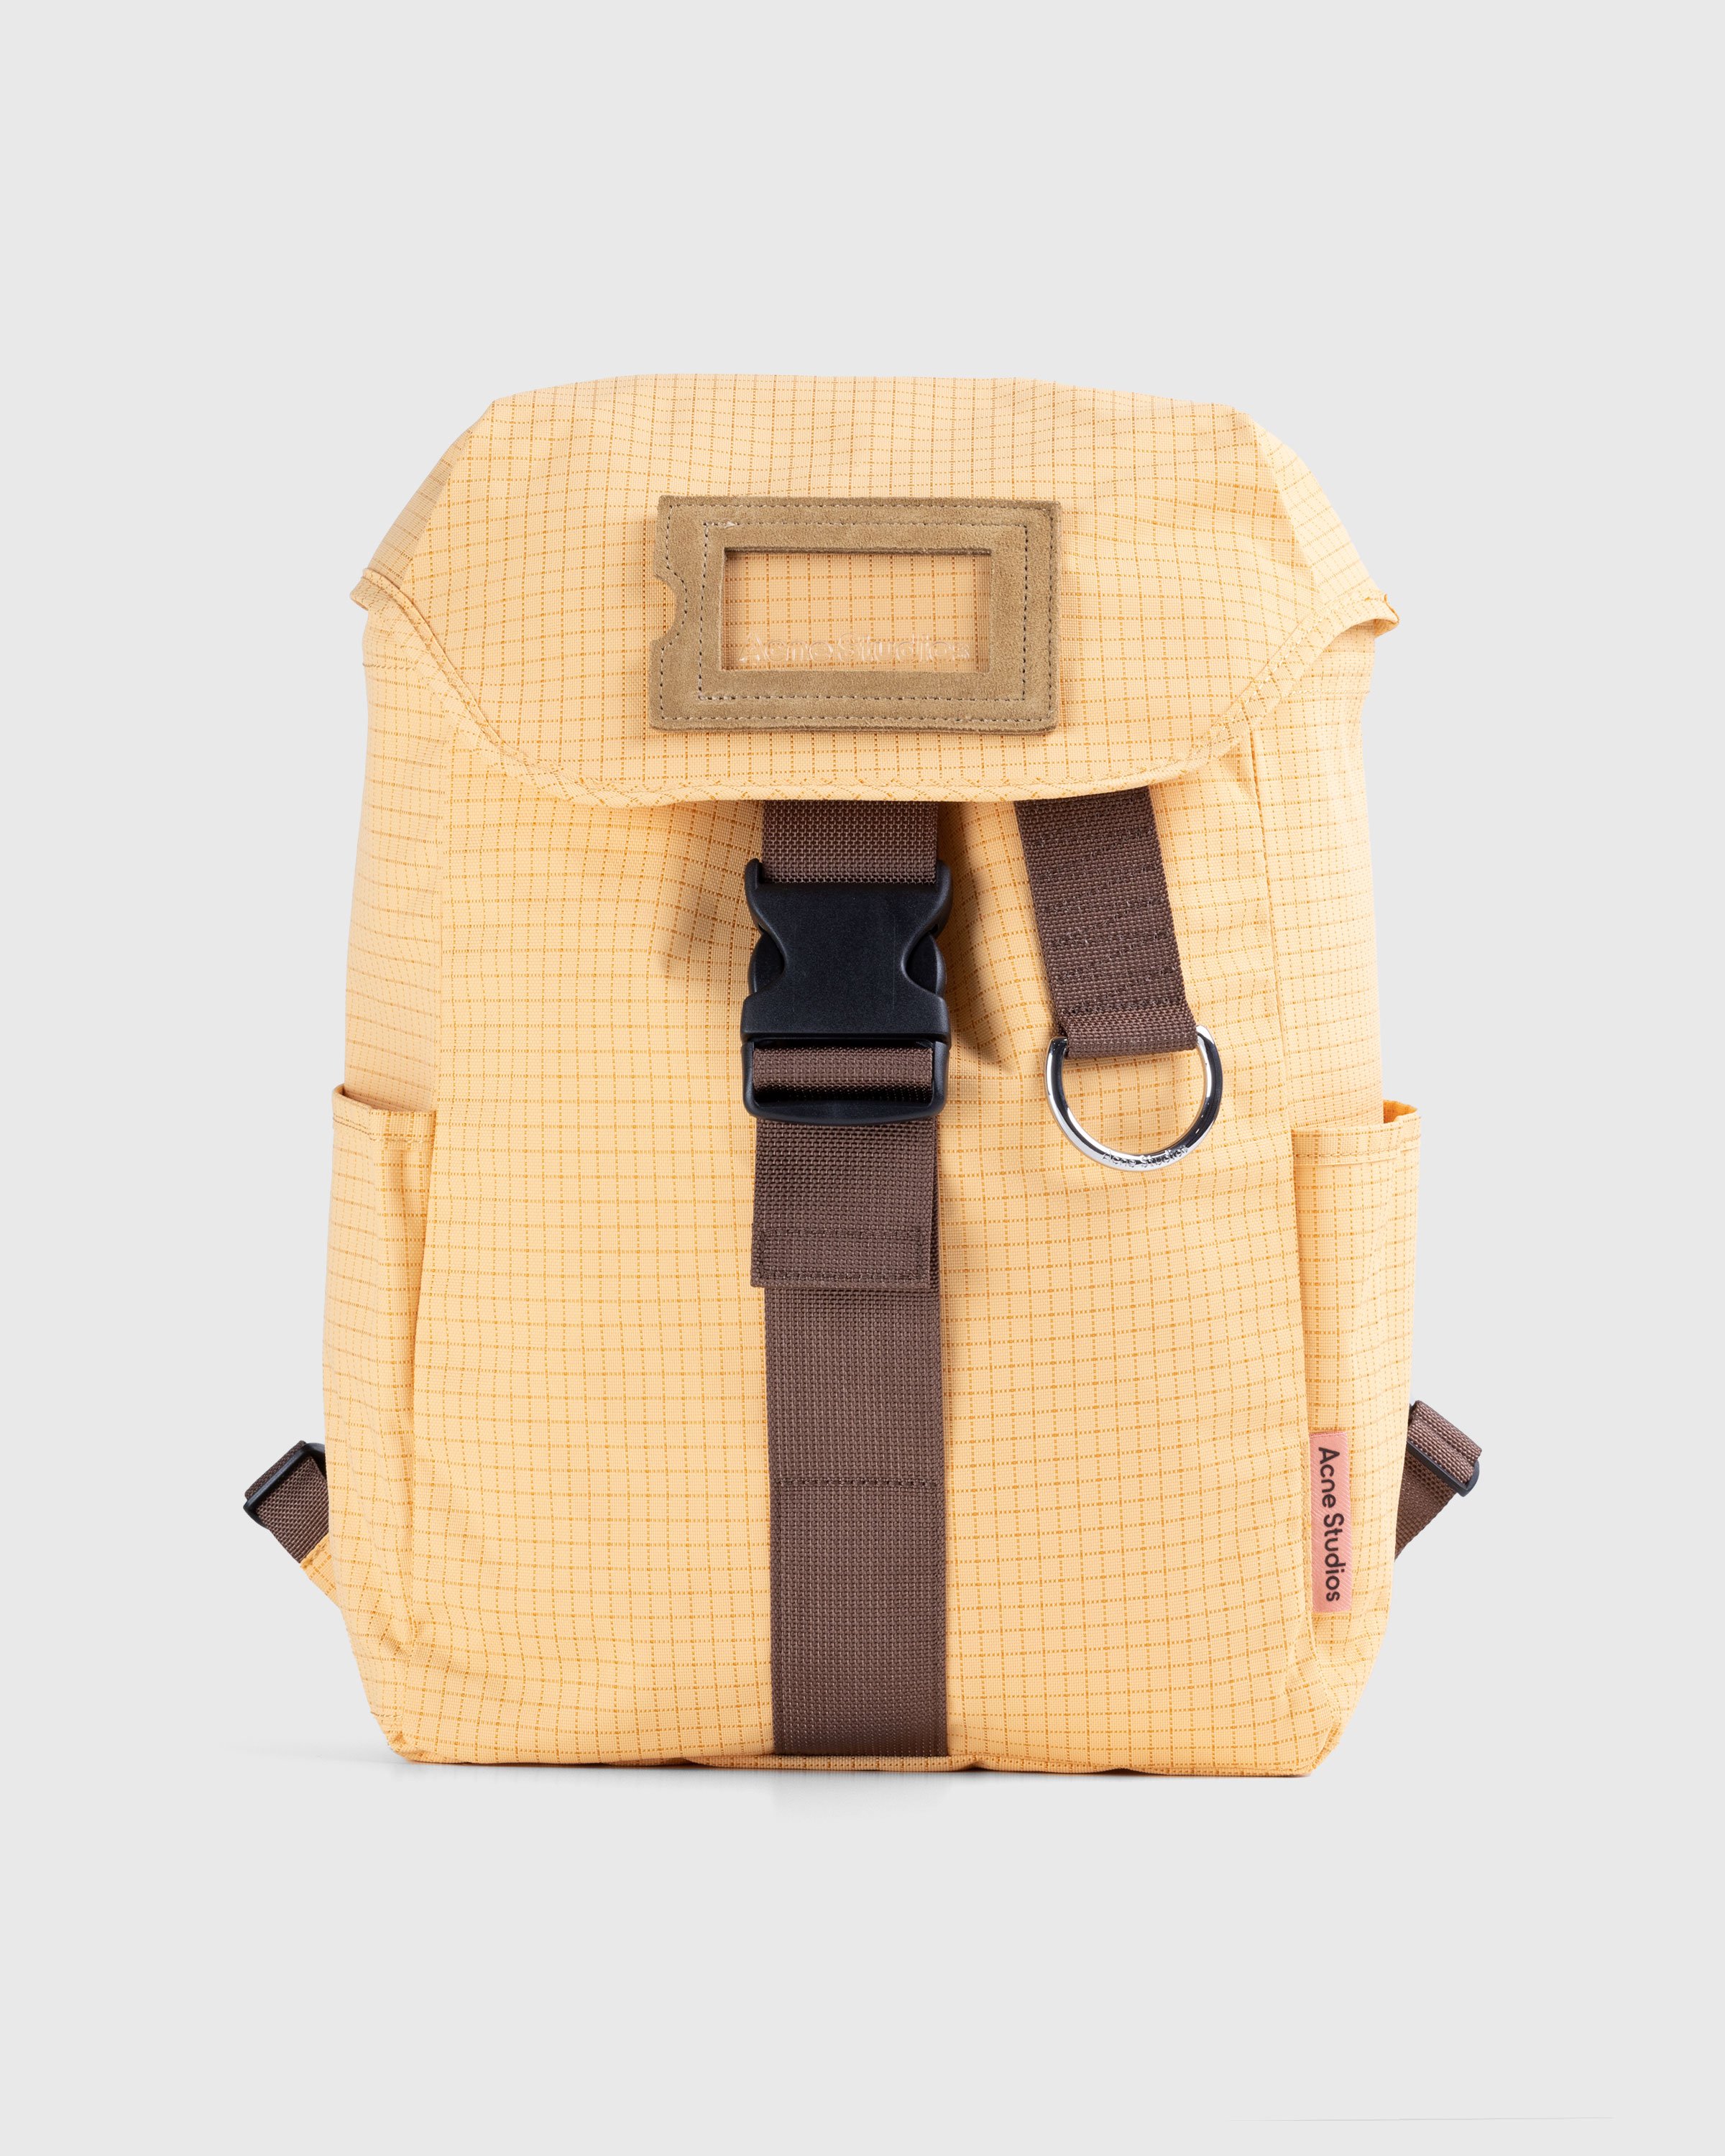 Acne Studios - Ripstop Nylon Backpack Yellow/Brown - Accessories - Multi - Image 1